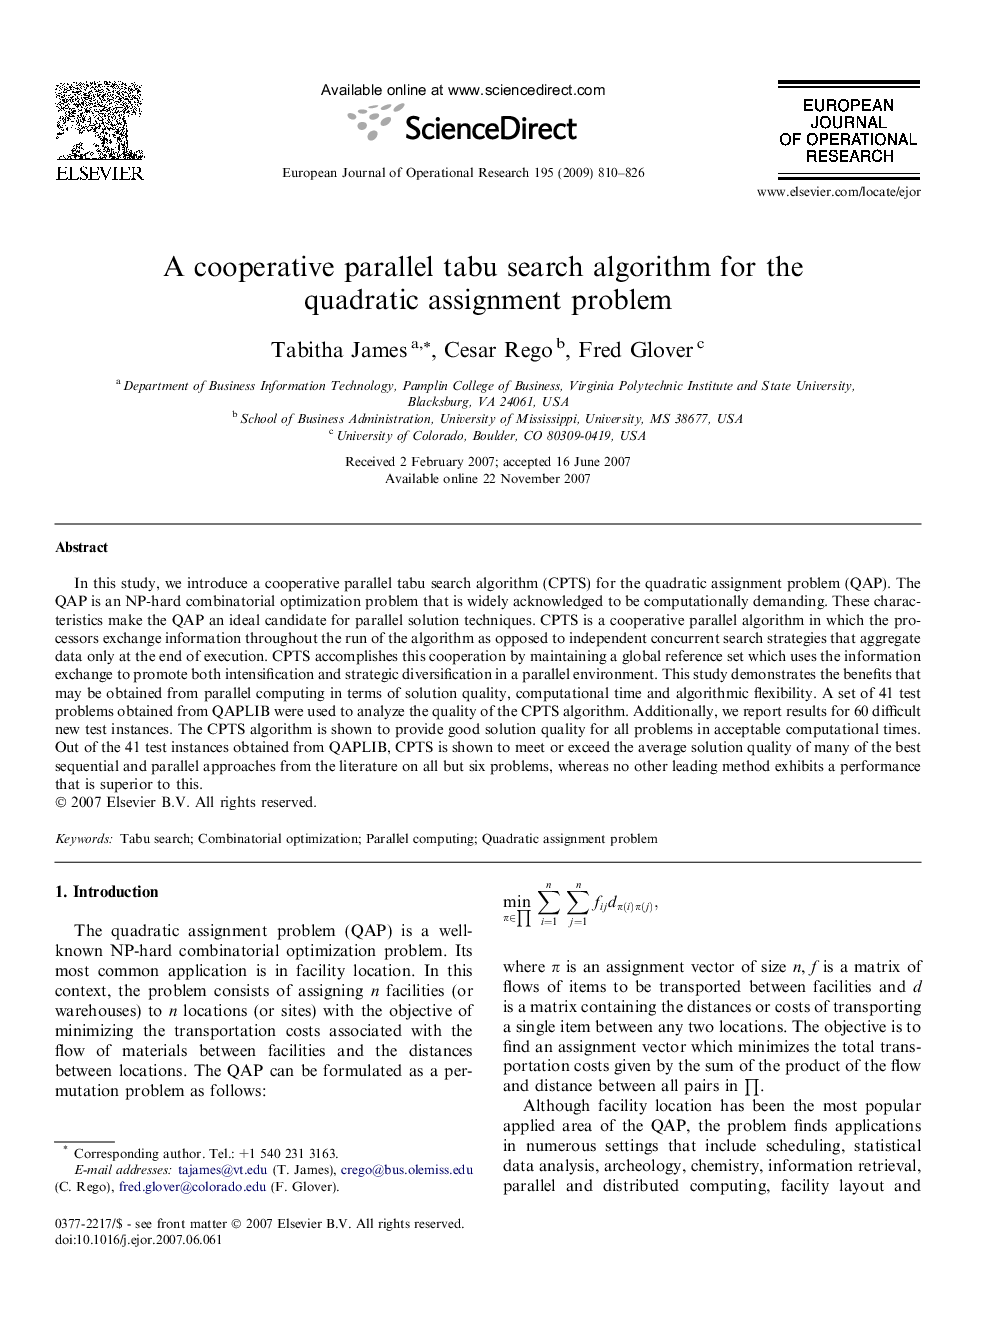 A cooperative parallel tabu search algorithm for the quadratic assignment problem